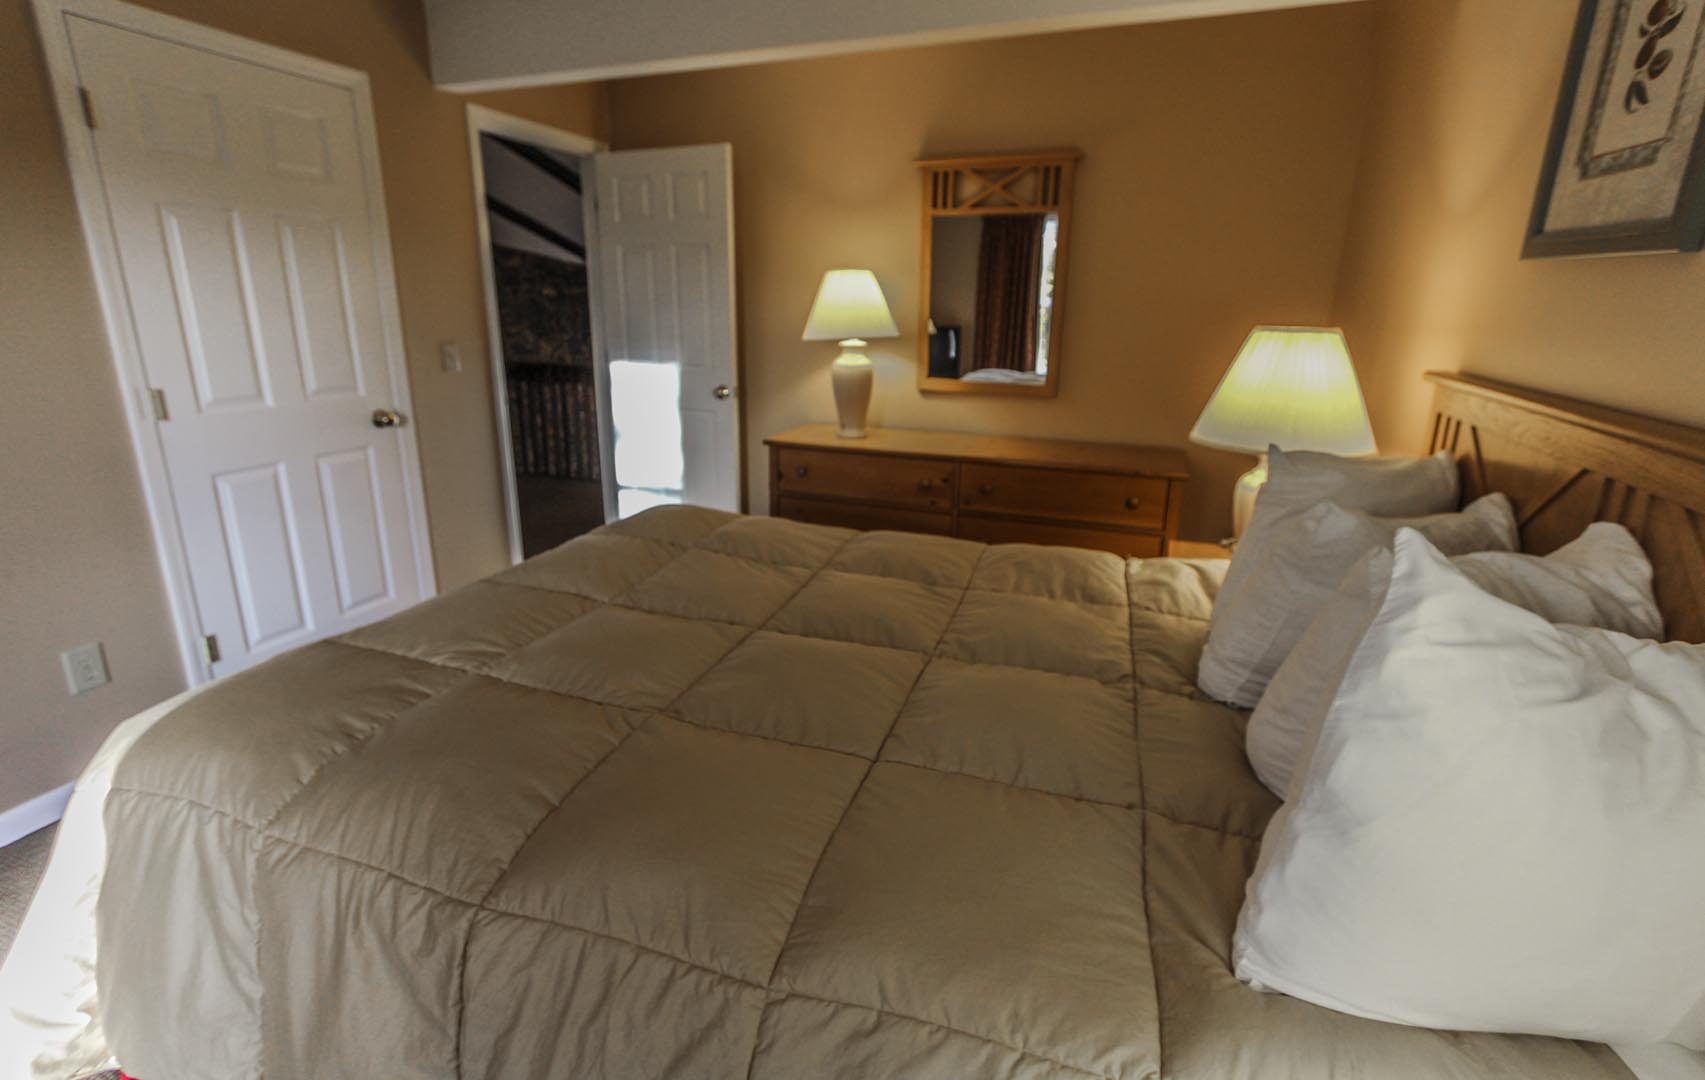 A comfy master bedroom at VRI's Lake Placid Club Lodges in New York.